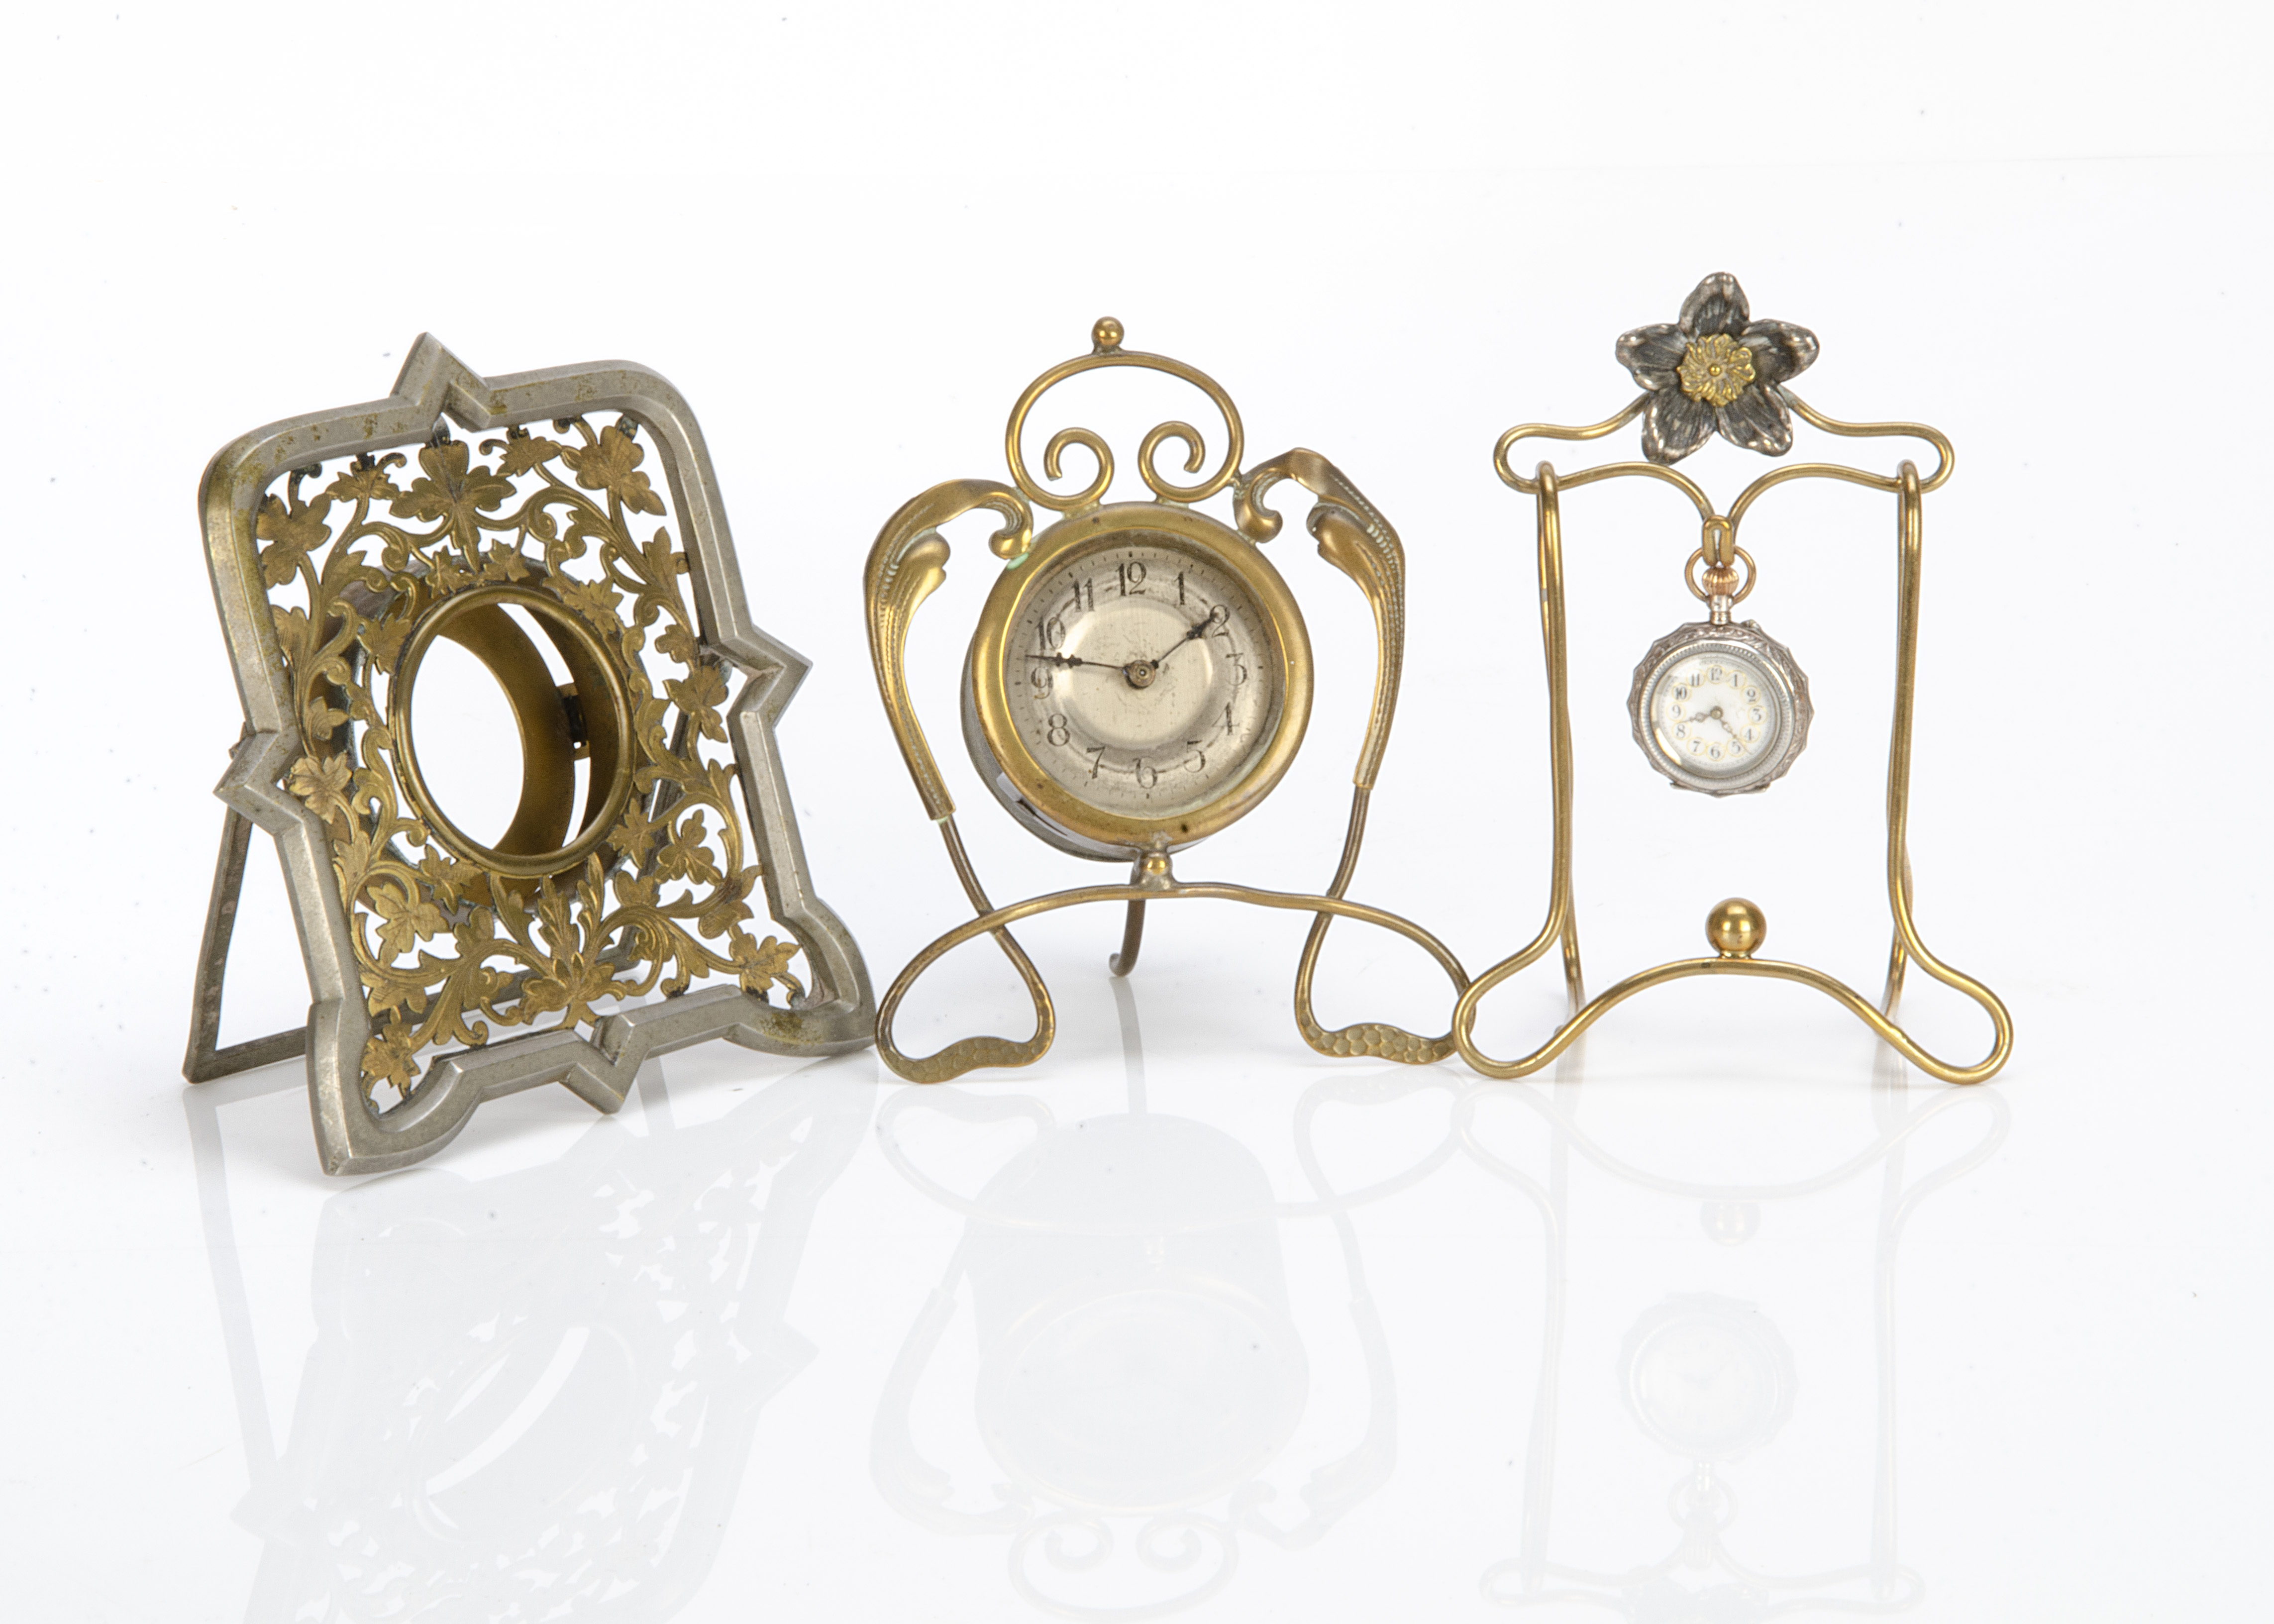 Three early 20th Century pocket watches and stands, one in the Edwardian Art Nouveau style with drum